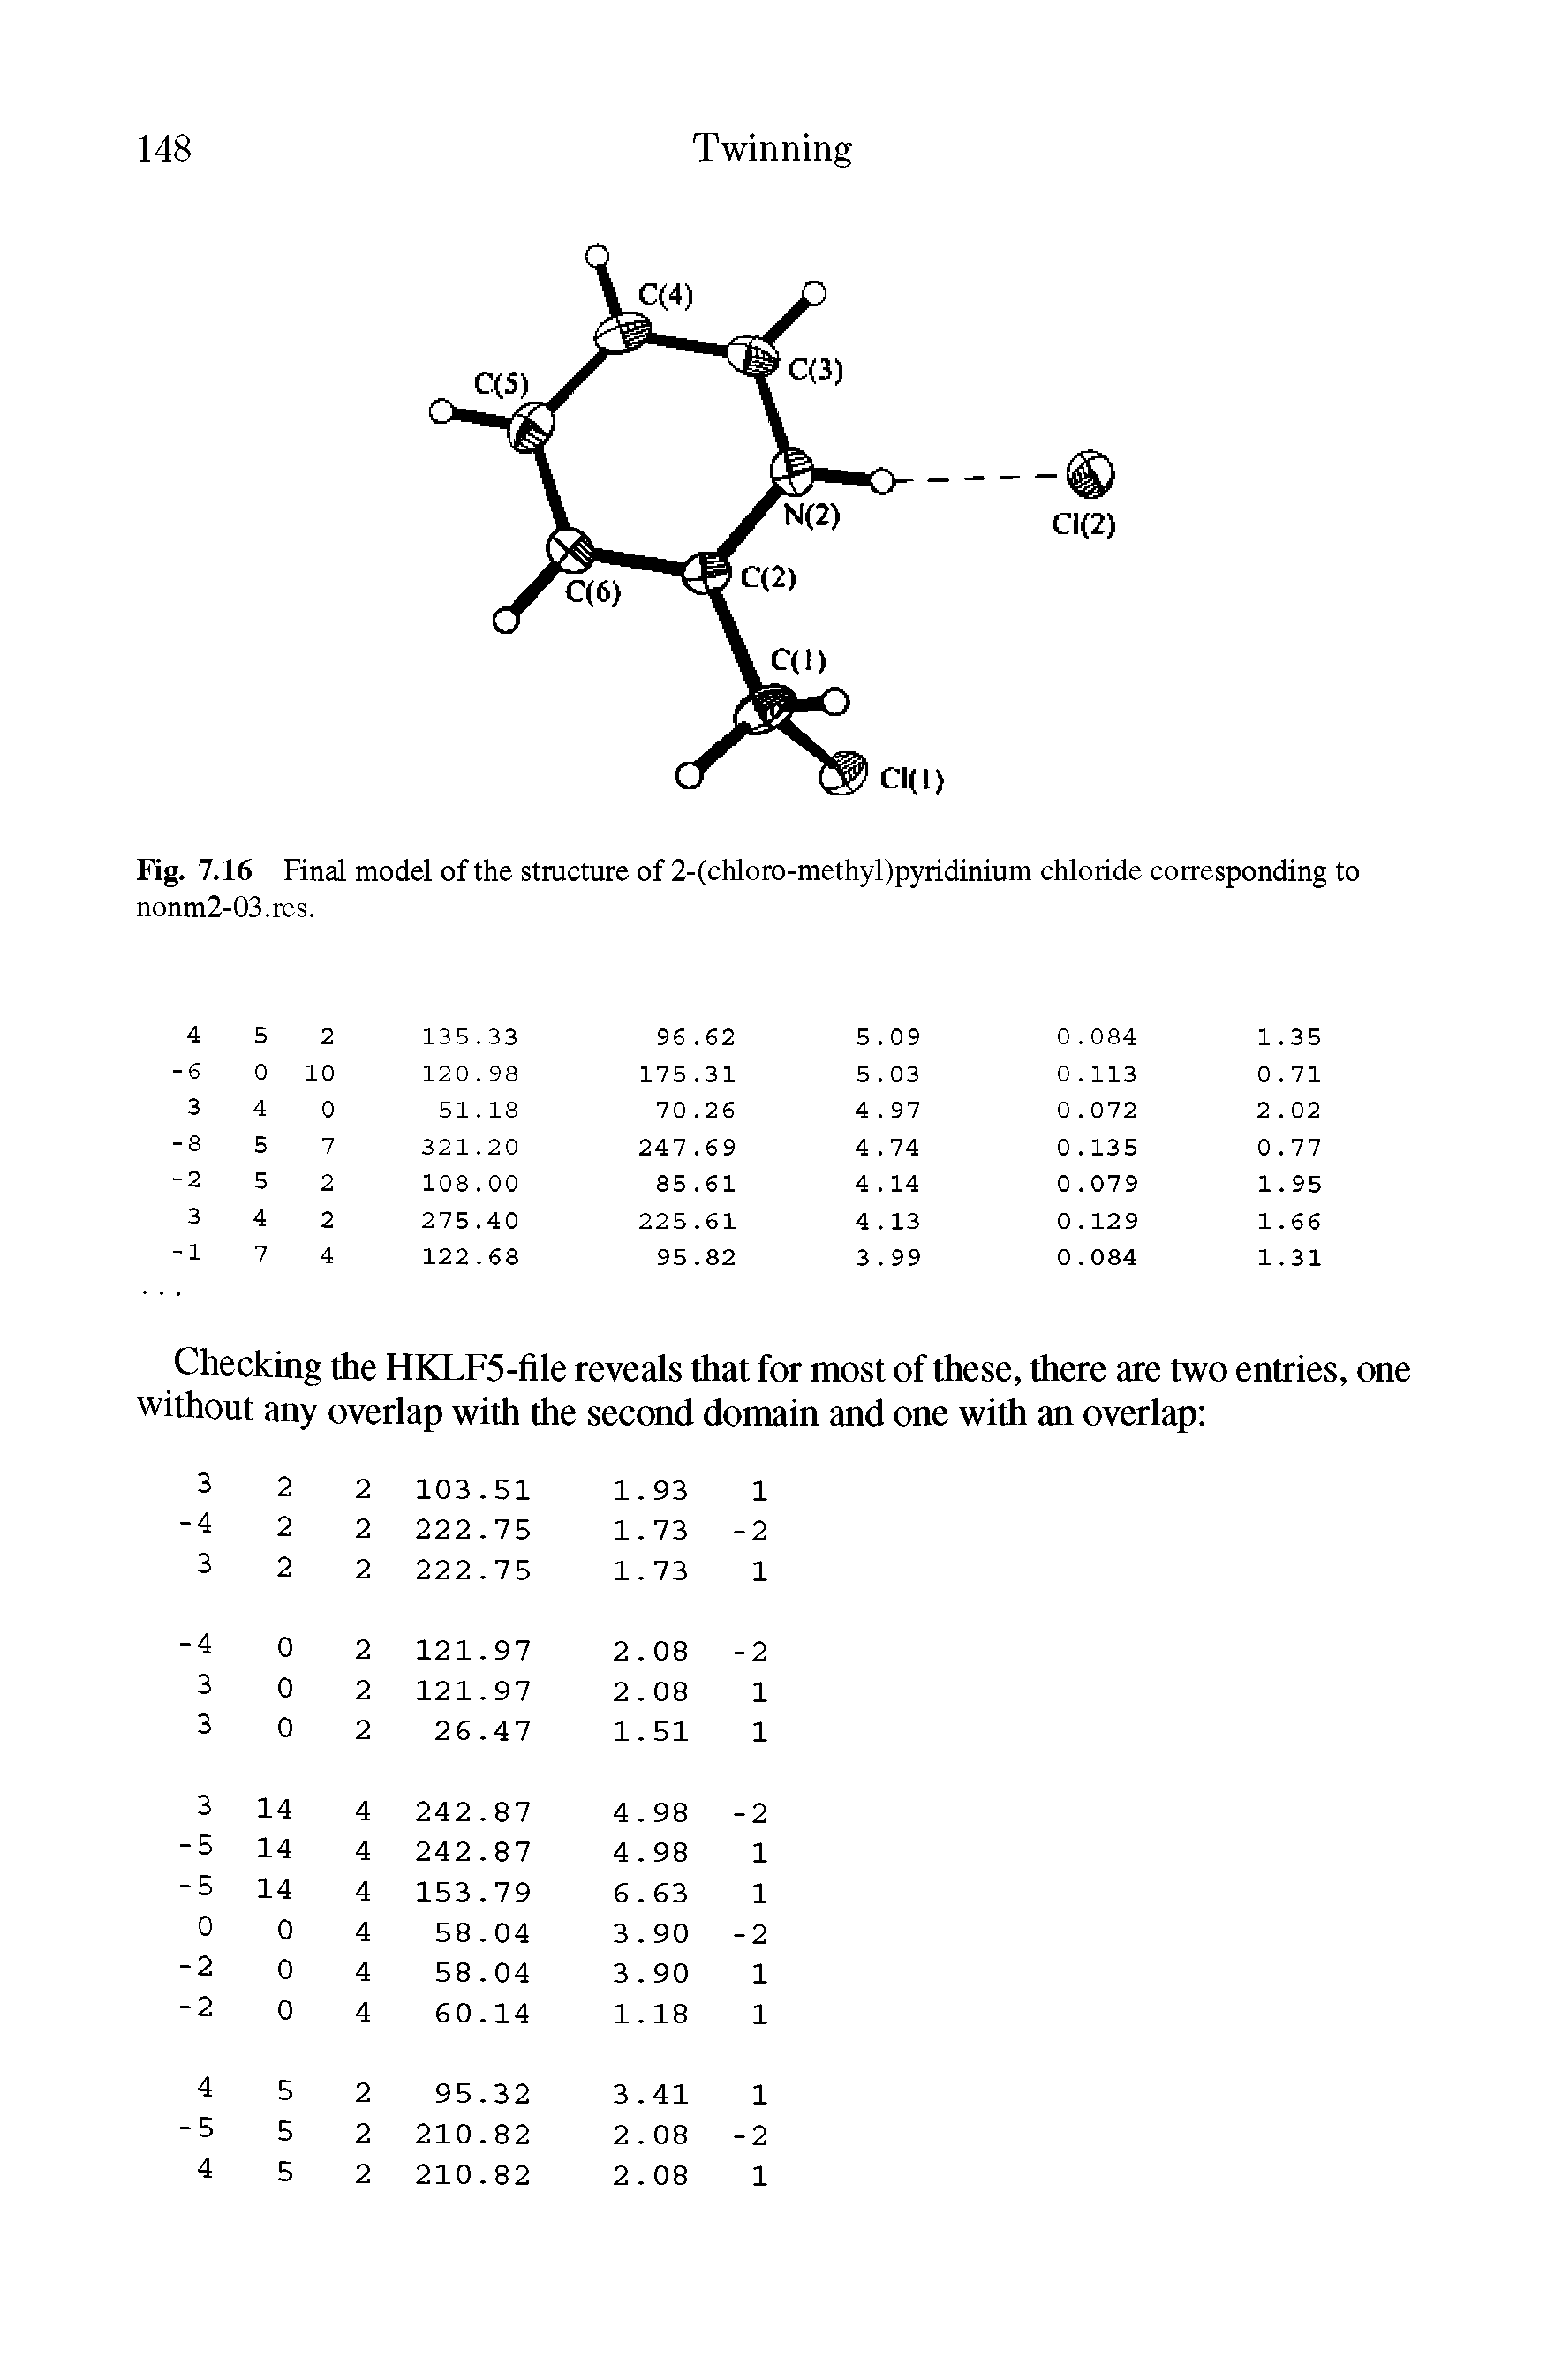 Fig. 7.16 Final model of the stmcture of 2-(chloro-methyl)pyridinium chloride corresponding to nonm2-03.res.